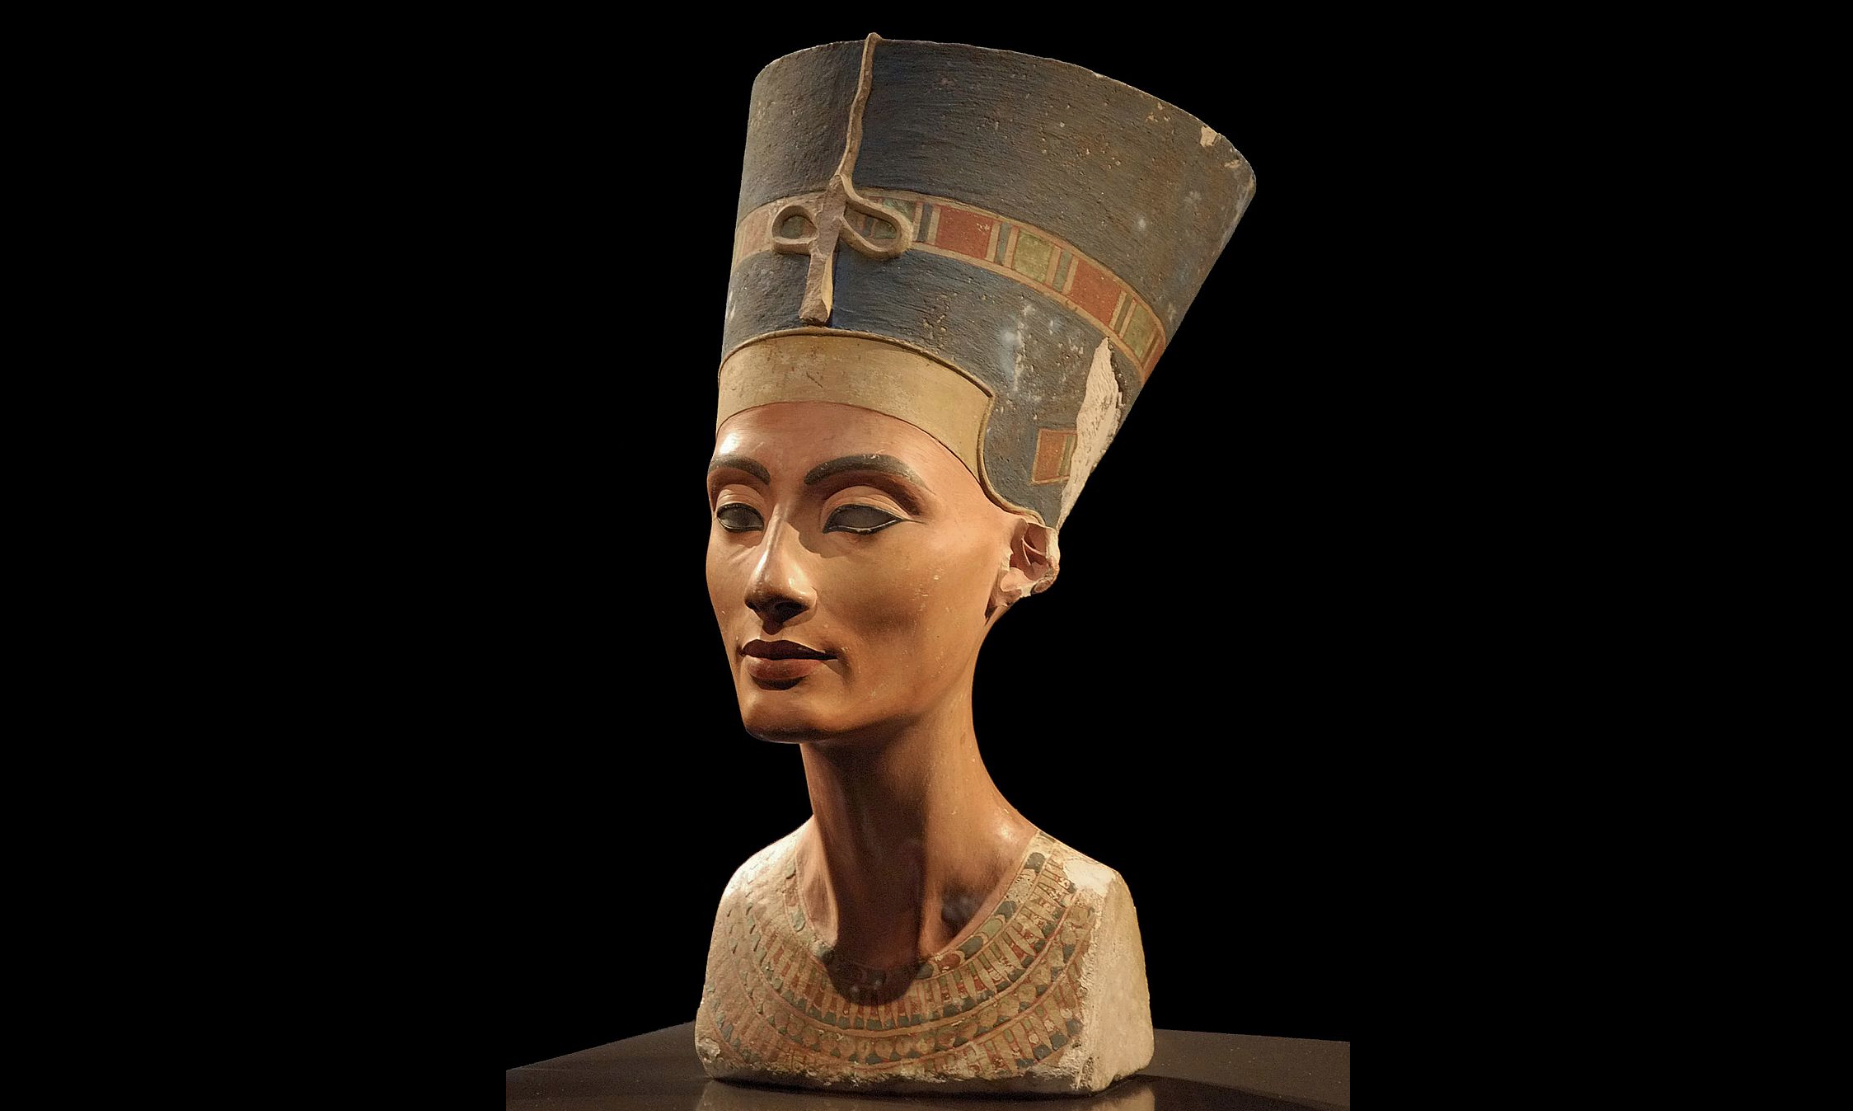 Thutmose, Model Bust of Queen Nefertiti, c. 1340 BCE, limestone and plaster, New Kingdom, 18th dynasty, Amarna Period (Egyptian Museum and Papyrus Collection/Neues Museum, Berlin)